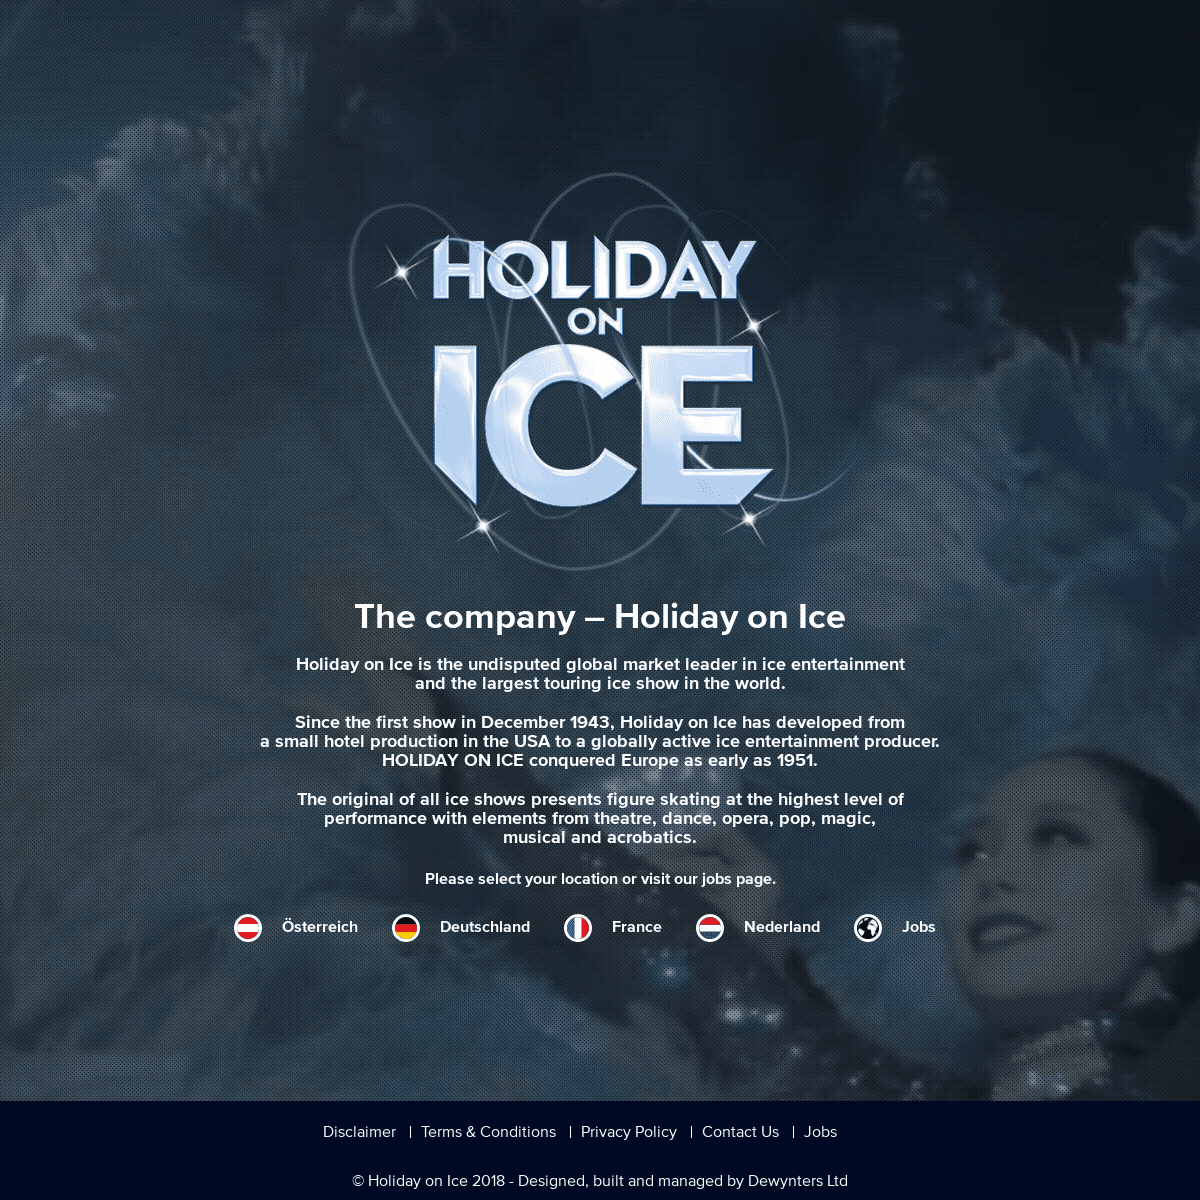 A complete backup of https://holidayonice.com